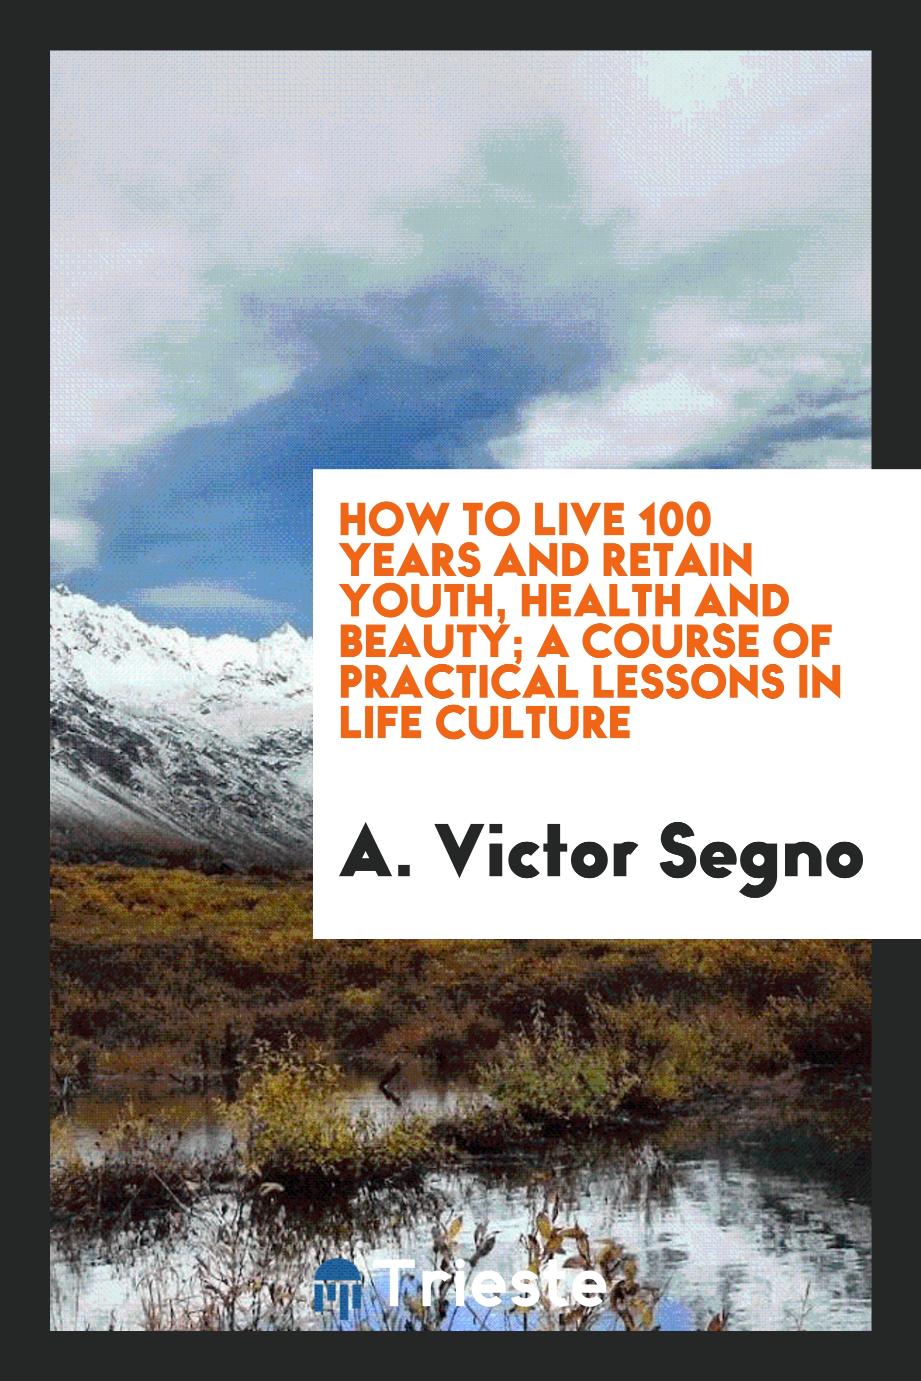 How to live 100 years and retain youth, health and beauty; a course of practical lessons in life culture